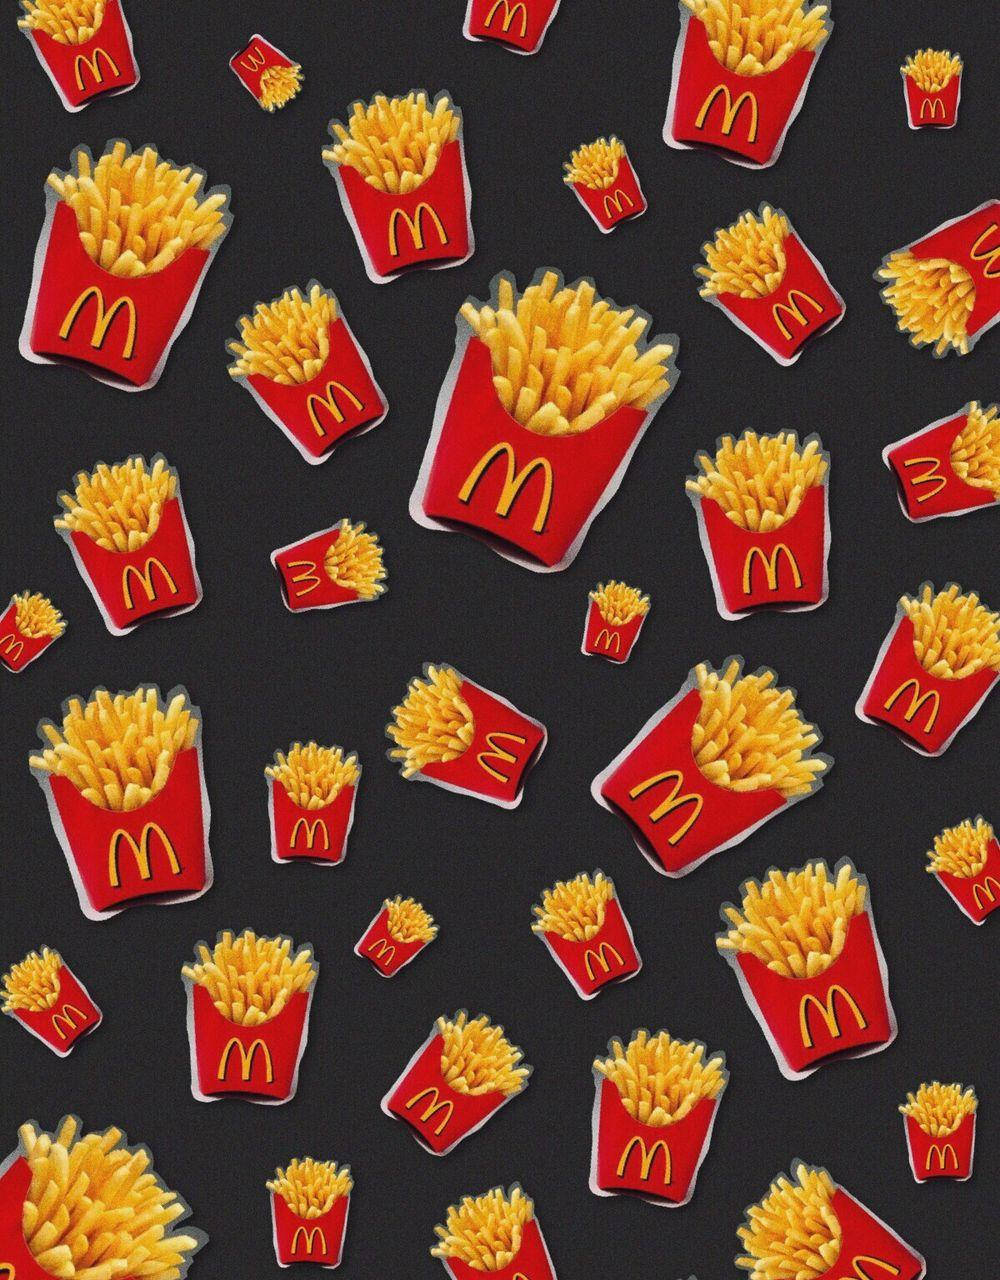 A Mouth-watering Pattern Of Golden-crisp French Fries Background